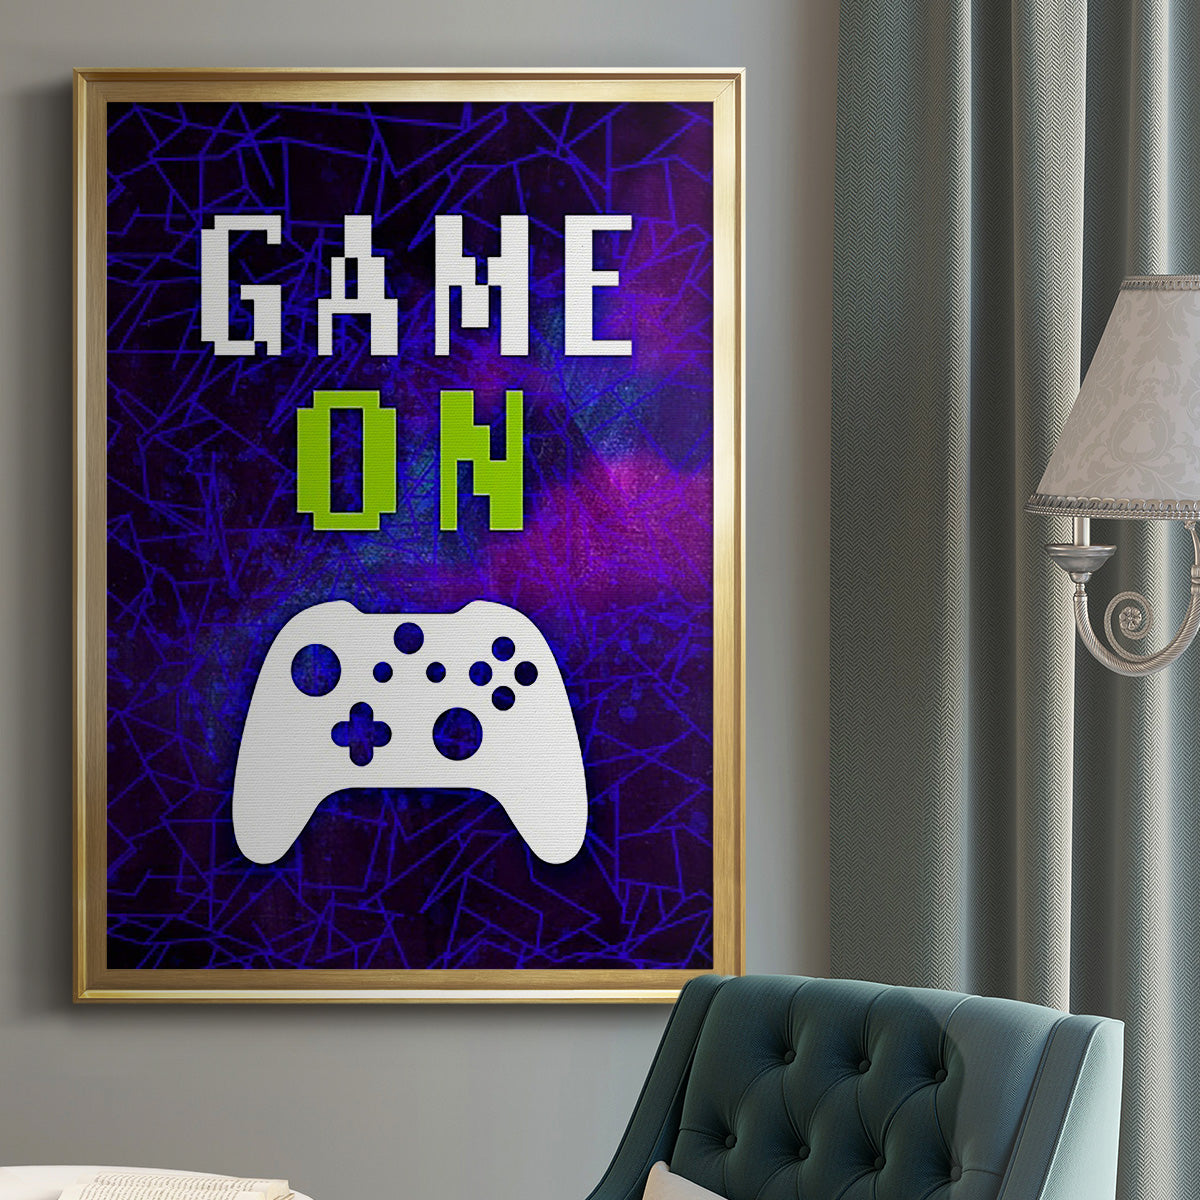 It's Game On II Premium Framed Print - Ready to Hang